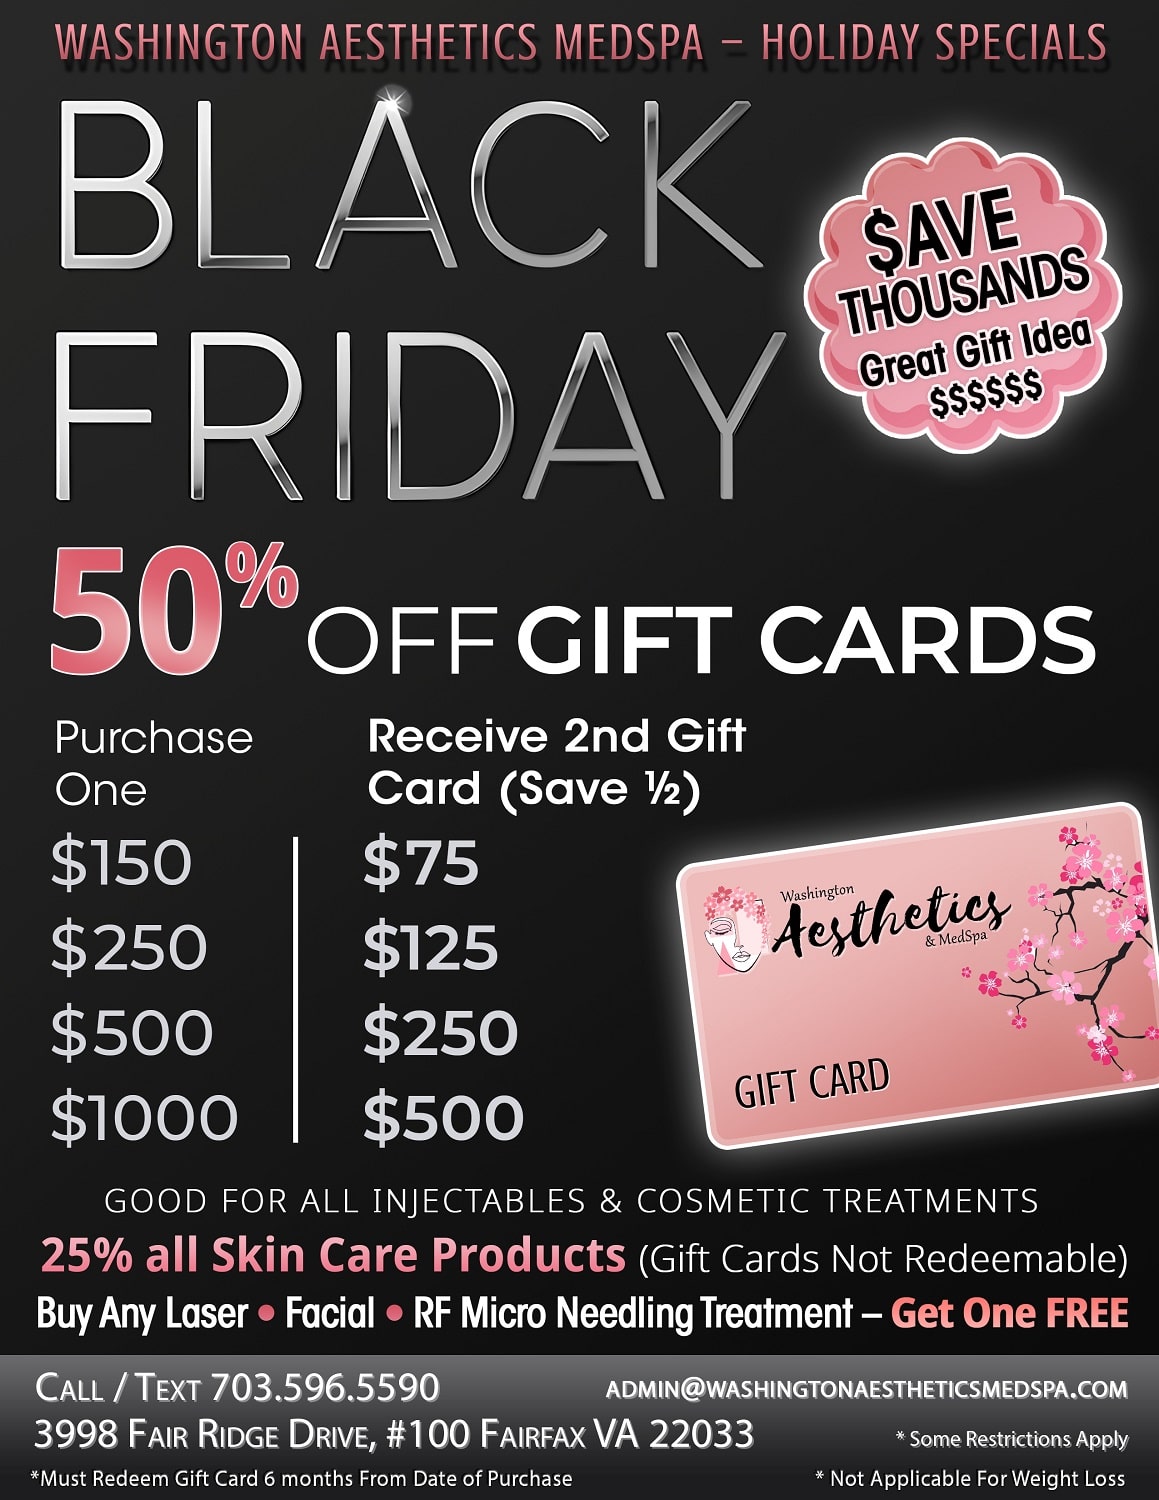 Black Friday 50 % off Cosmetic Gift Cards